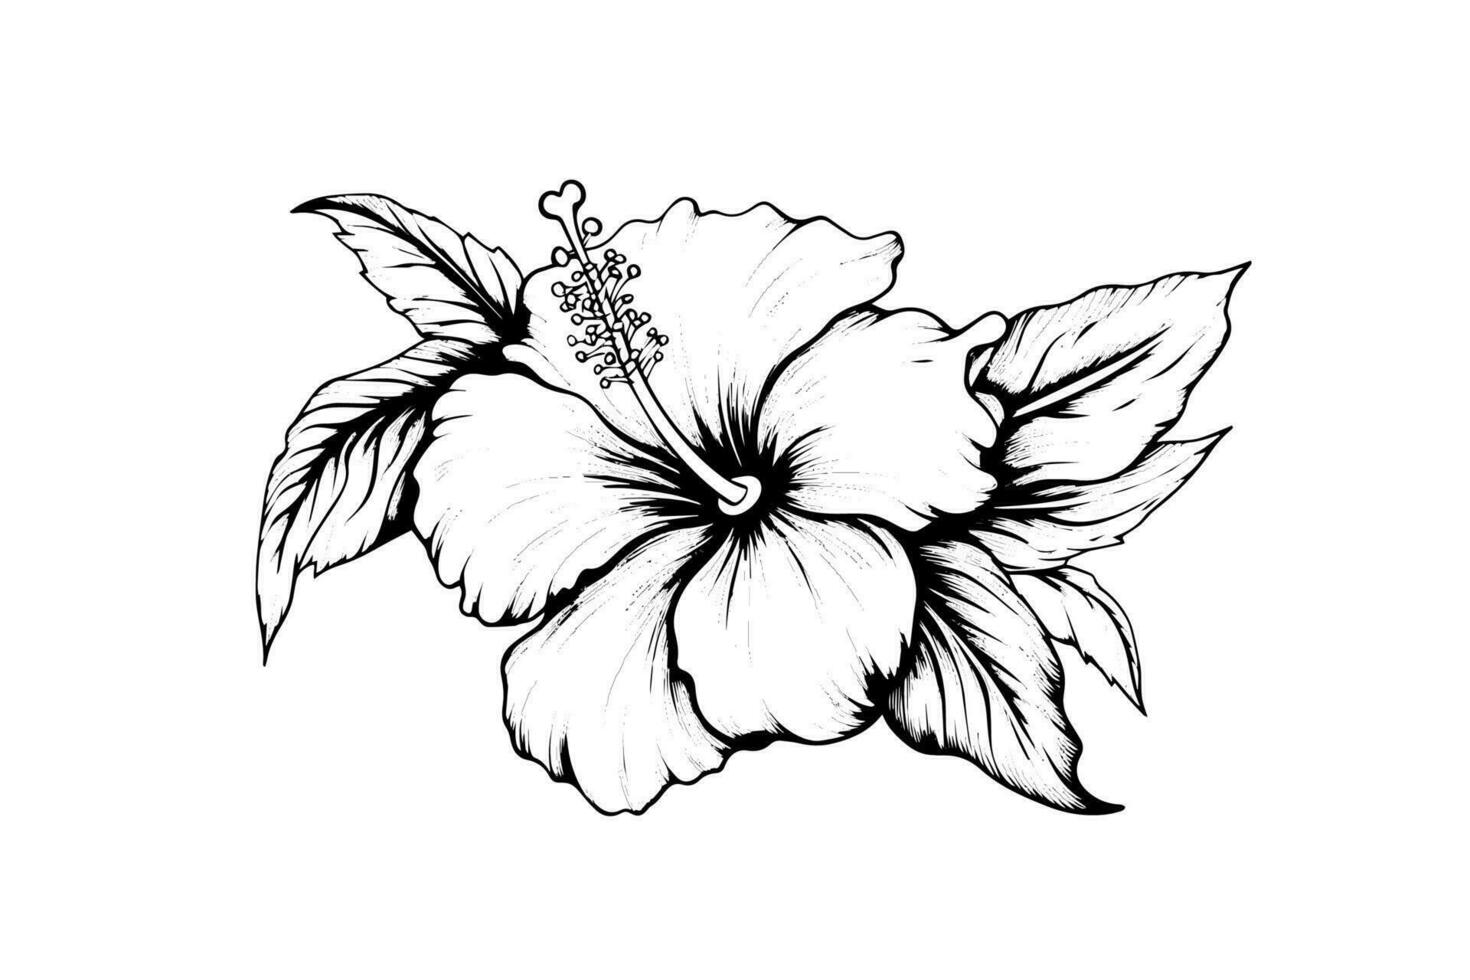 Hibiscus flowers in a vintage woodcut engraved etching style. Vector illustration.